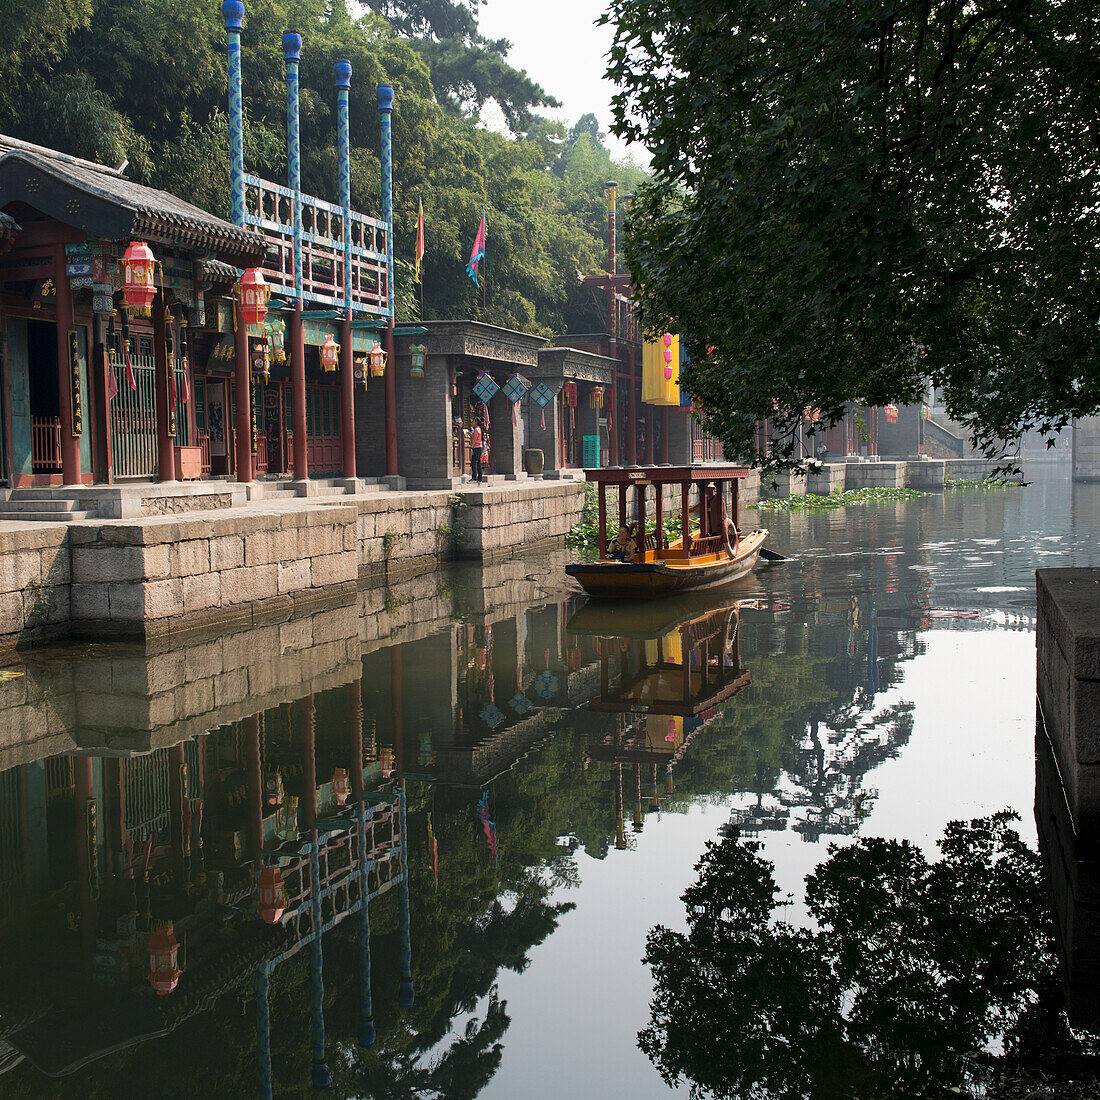 A boat in the tranquil river water and buildings along the water's edge, Beijing, China